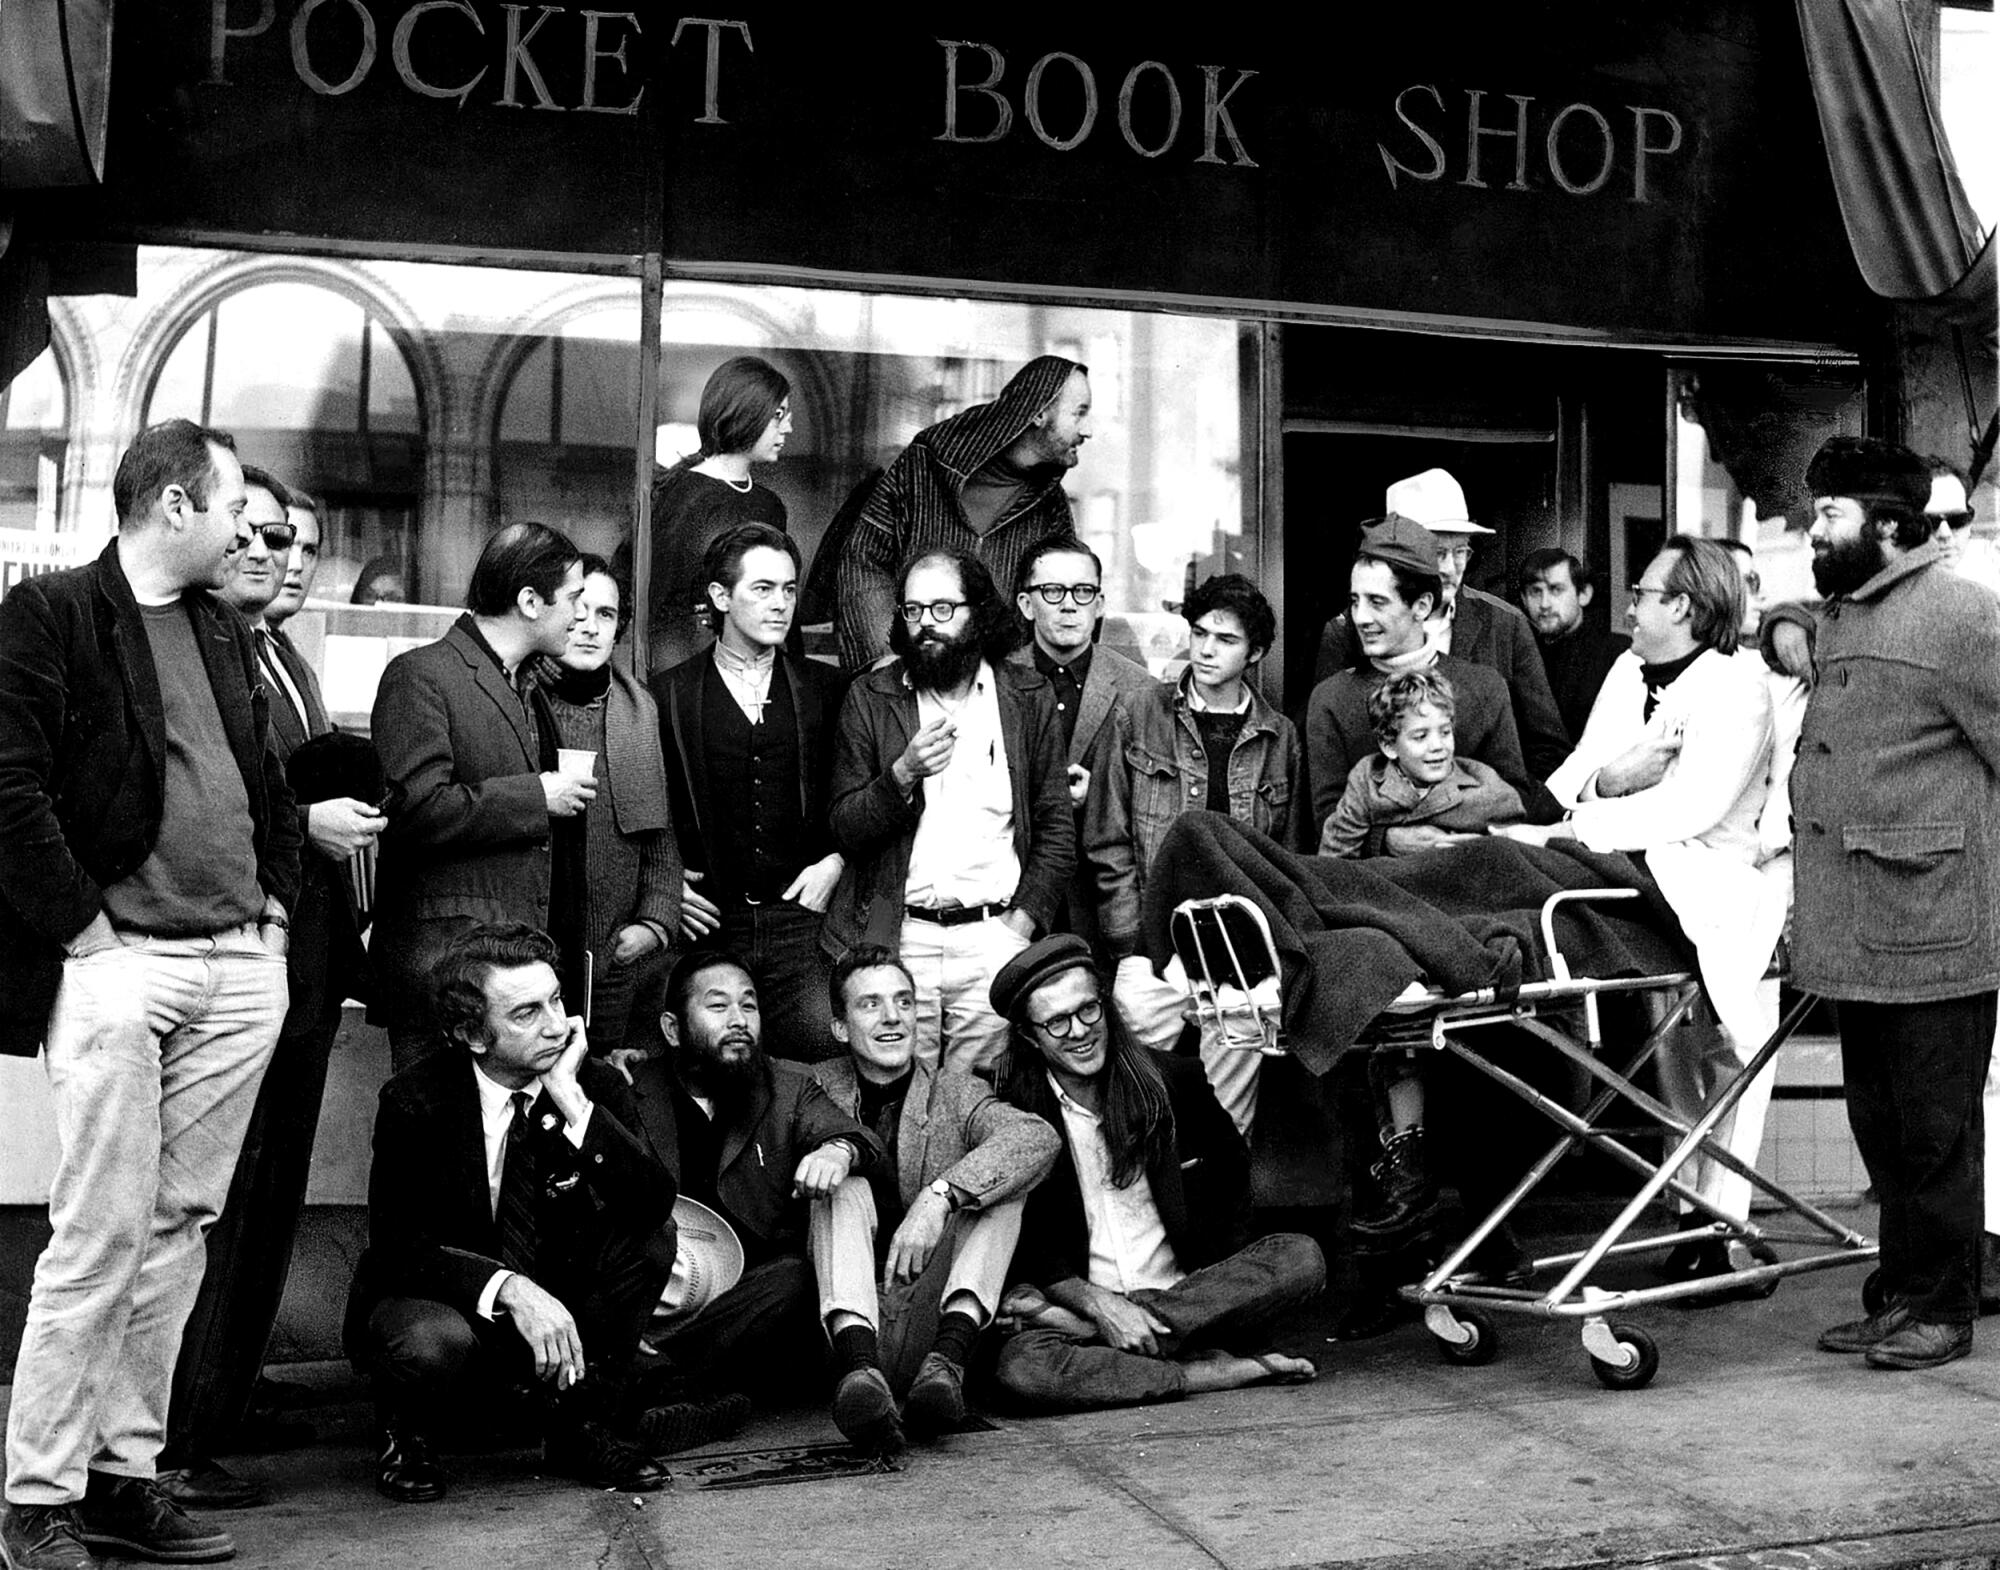 A conclave of poets and artists assembled at City Lights bookstore in 1965.